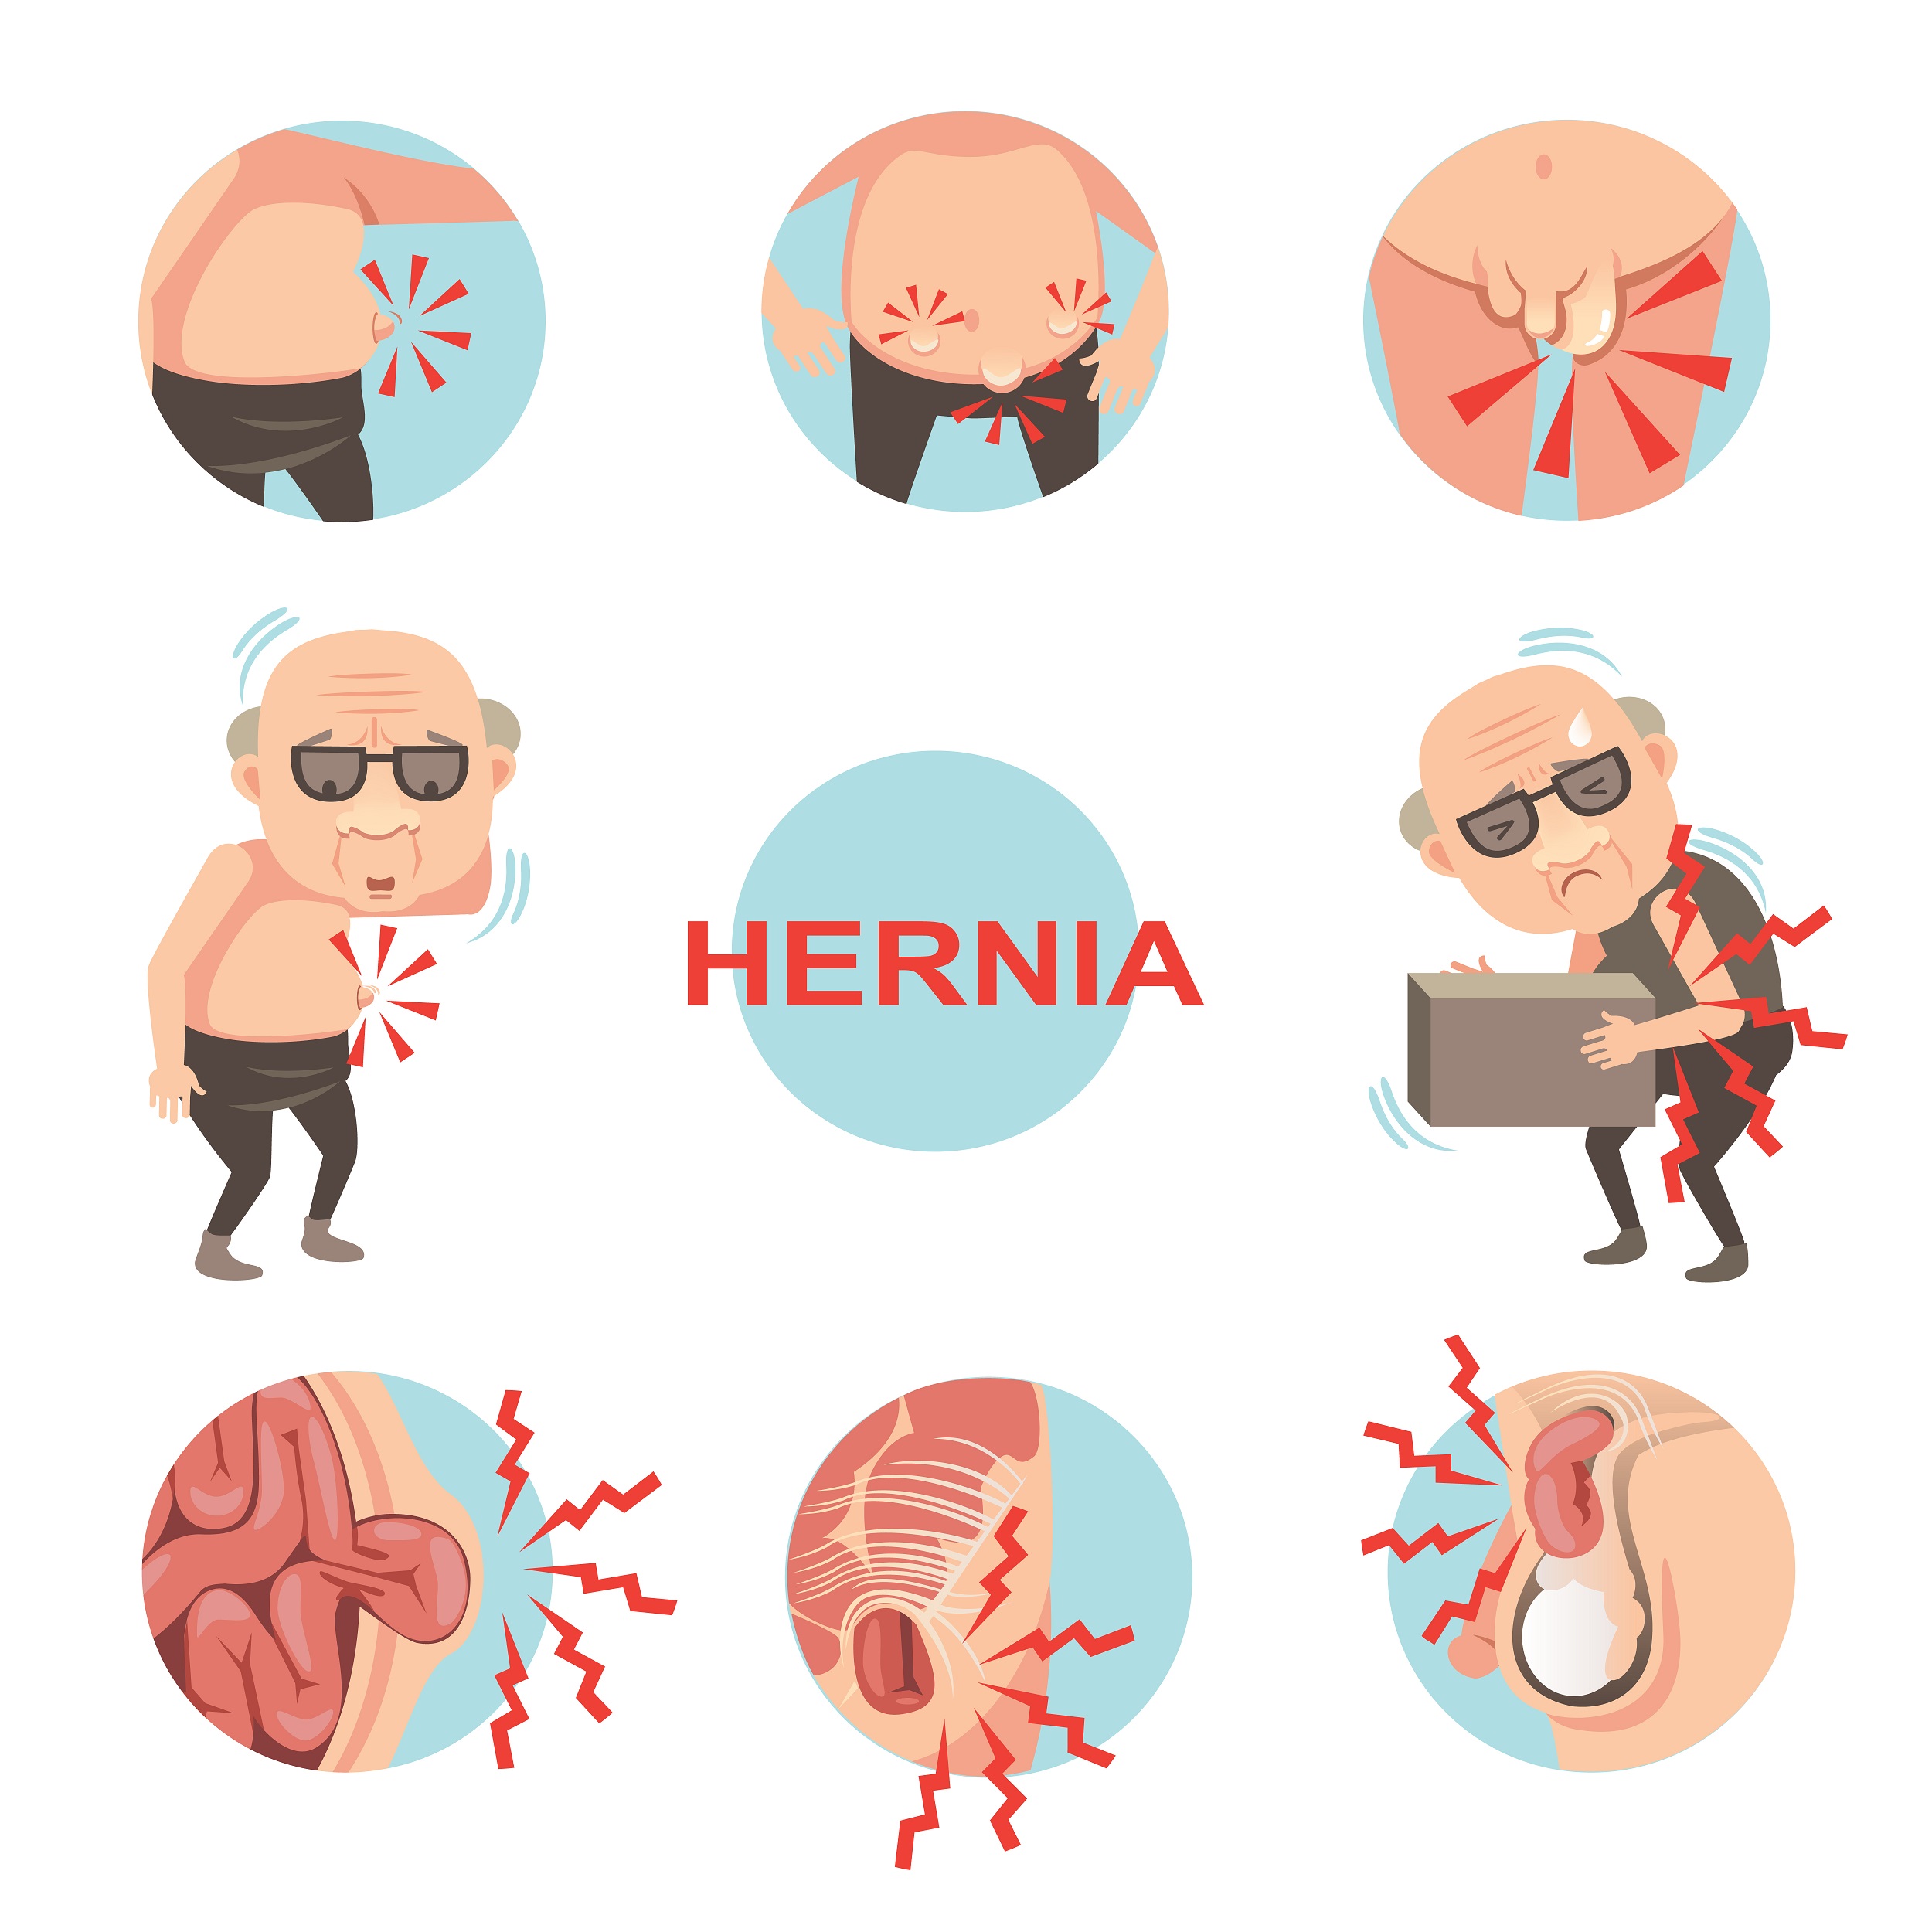 Untreated Hernias are More Dangerous Than You Think!